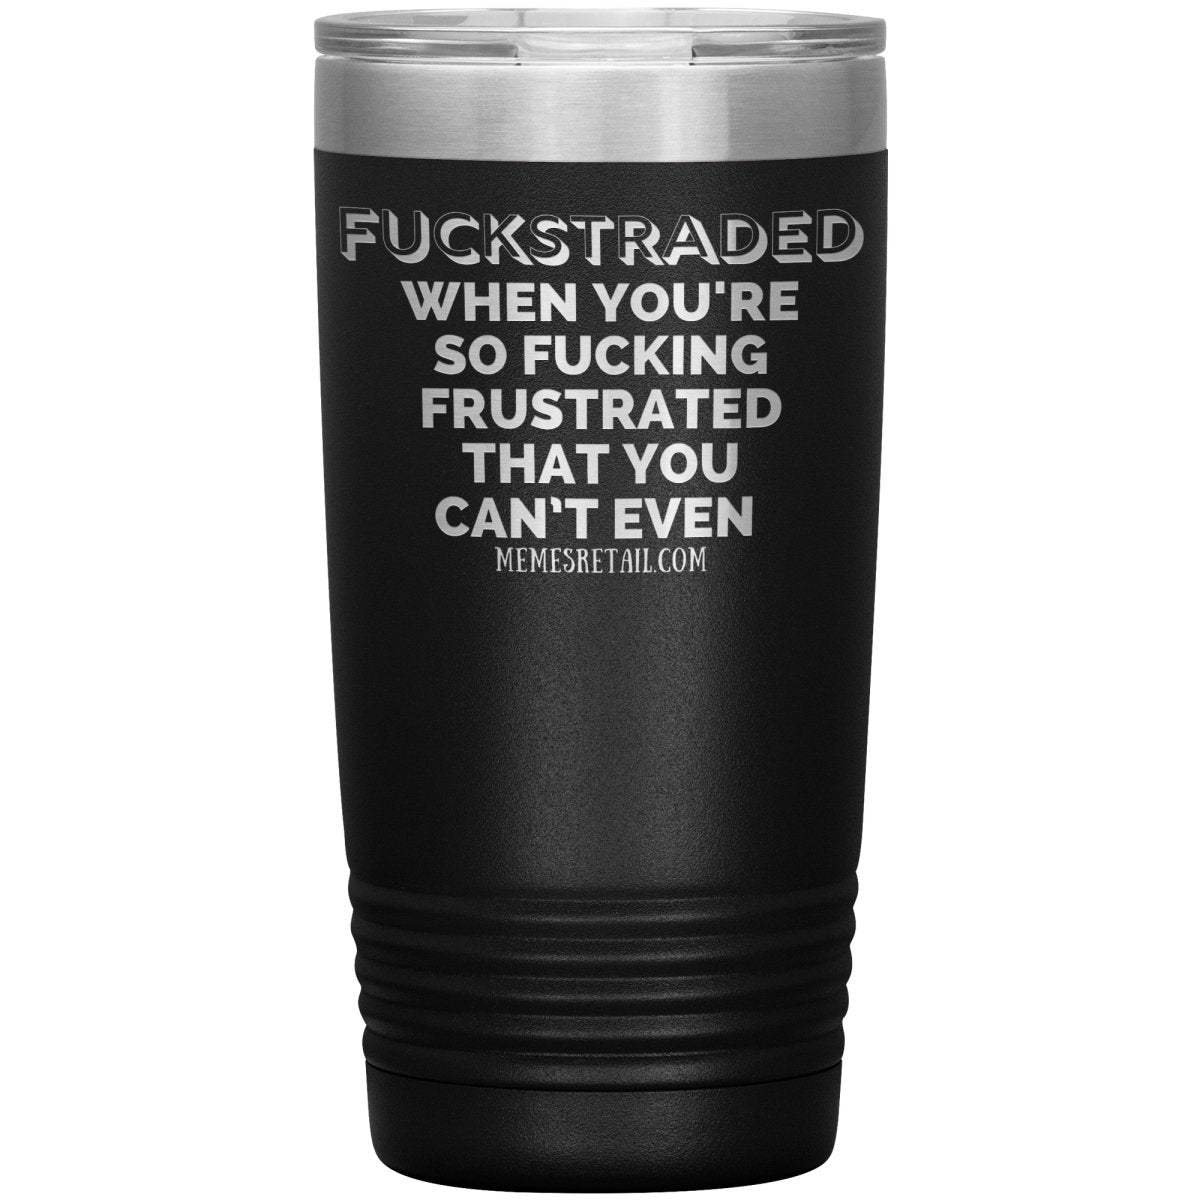 Fuckstraded, When You're So Fucking Frustrated That You Can’t Even Tumblers, 20oz Insulated Tumbler / Black - MemesRetail.com